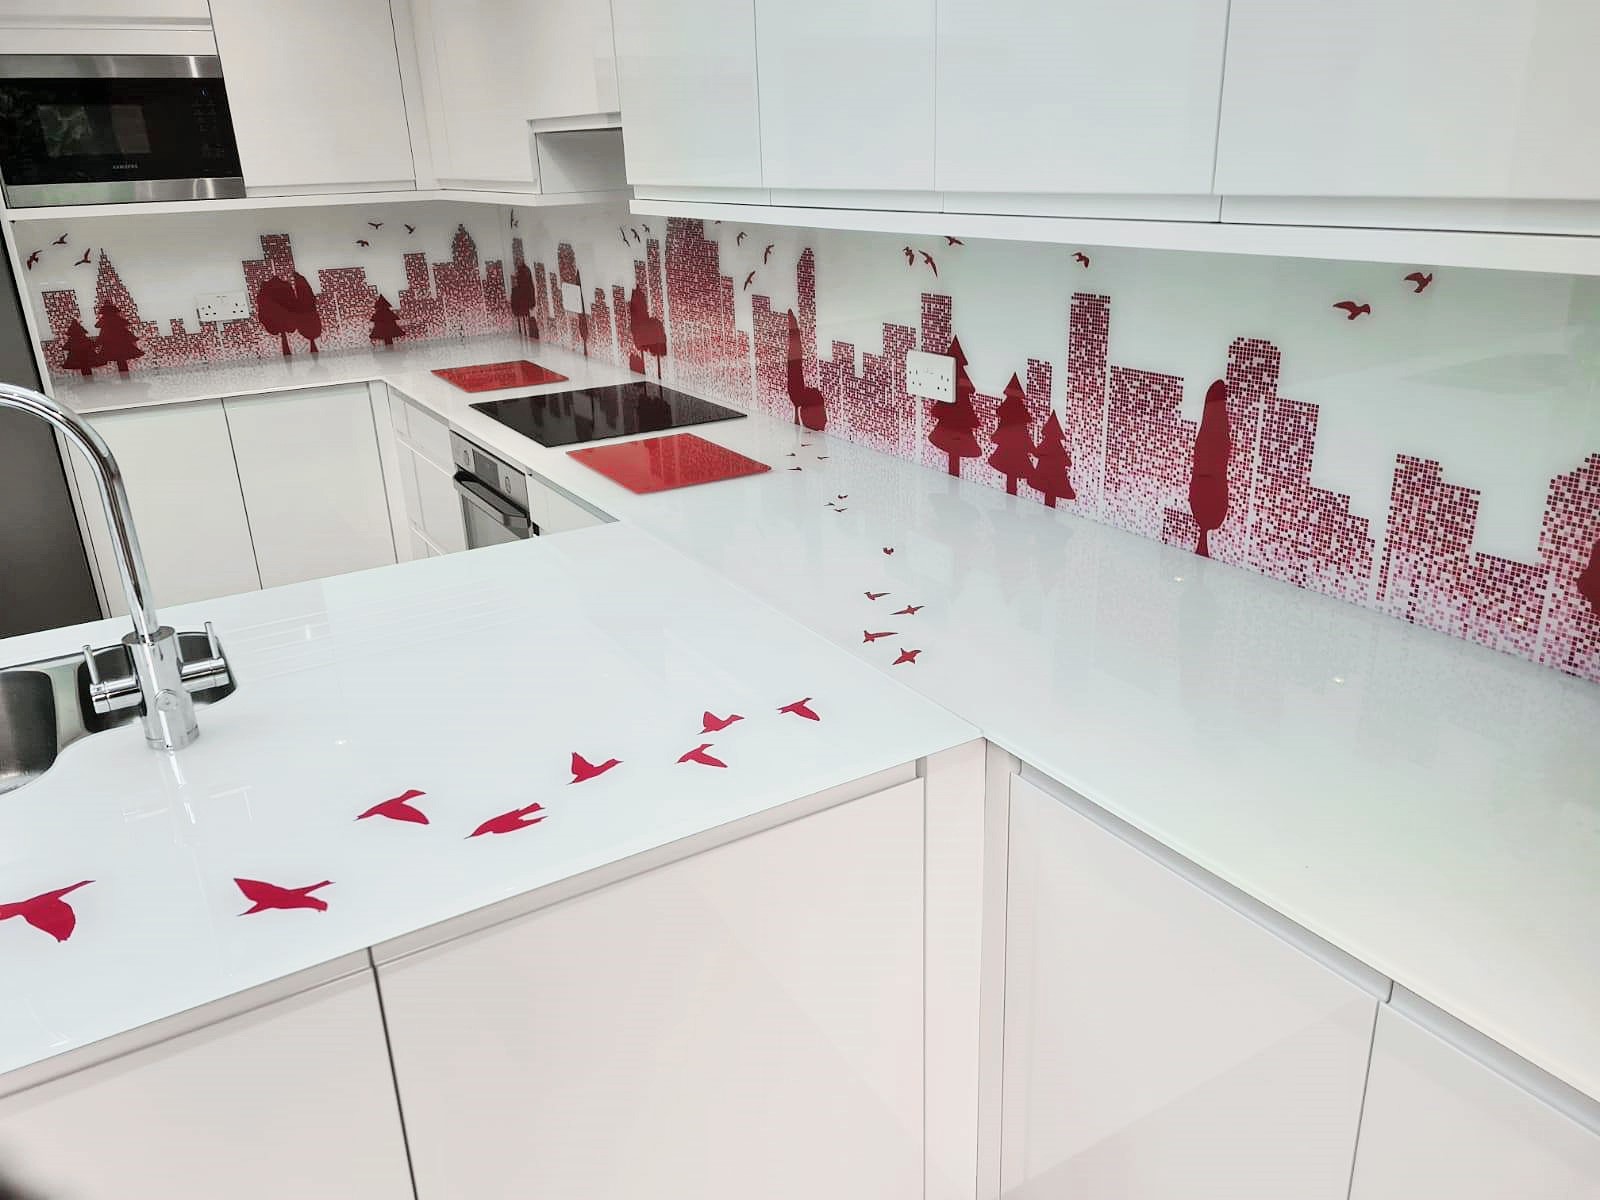 Printed glass splashback<br />
City out line in red and white glass splashback<br />
Glass Splashback